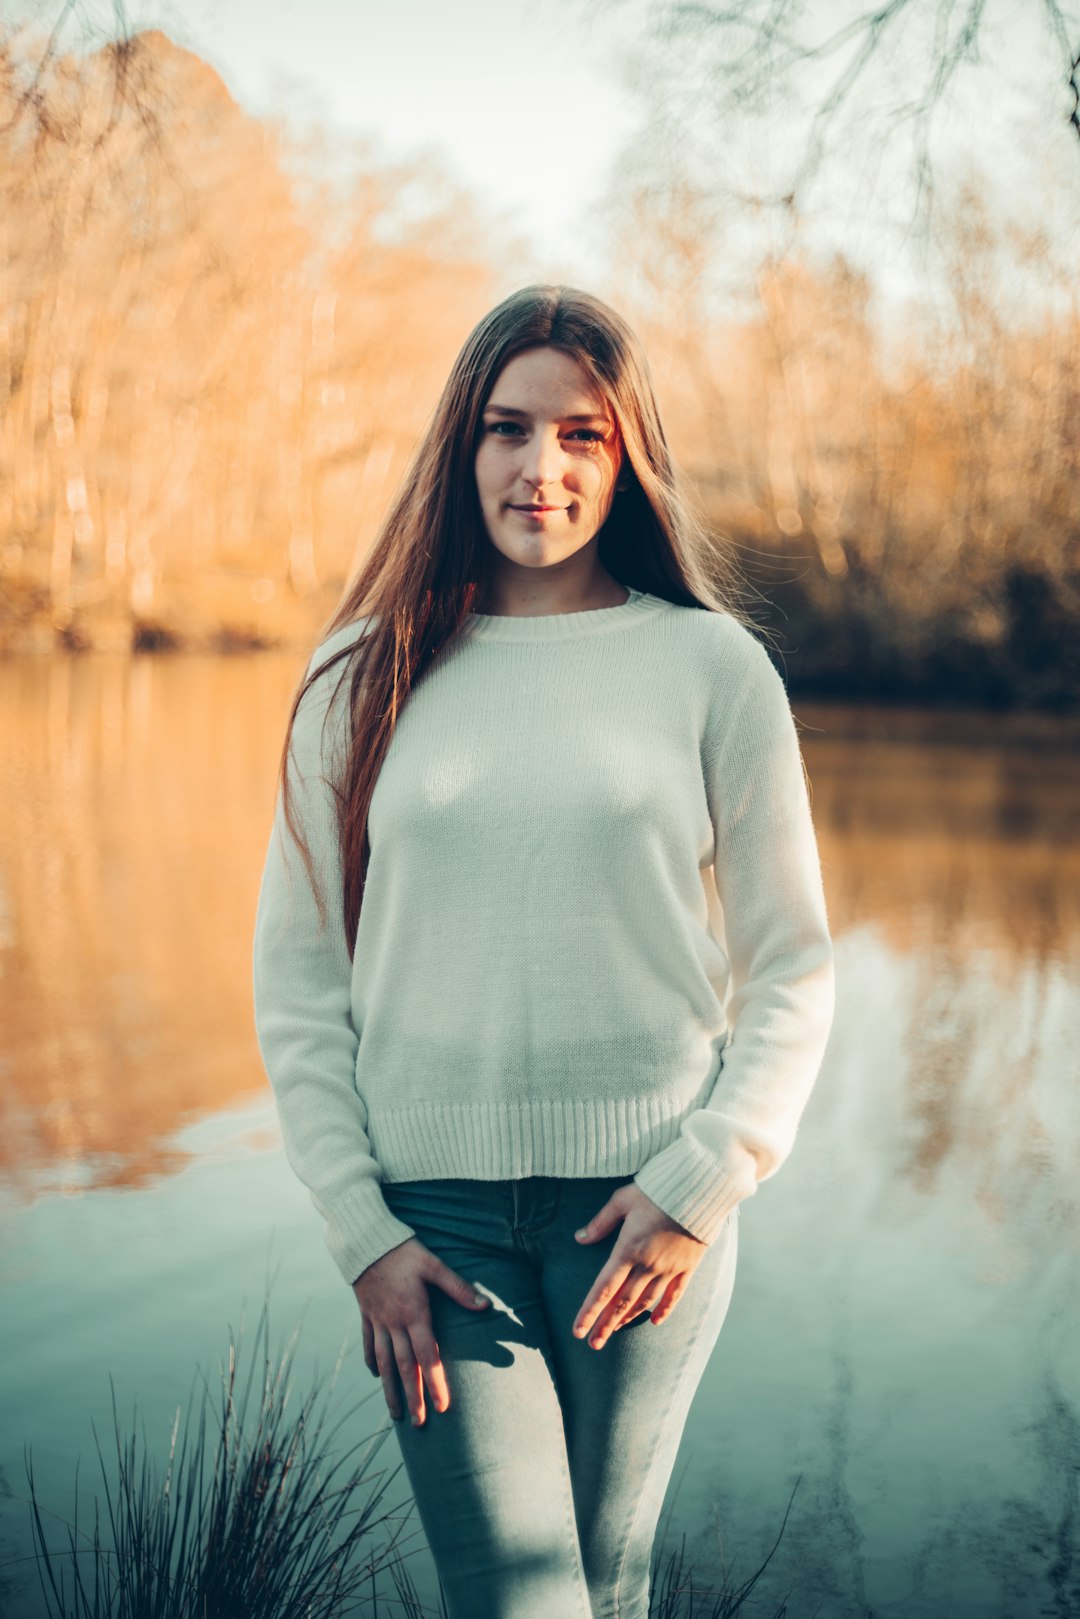 woman in gray long sleeve shirt and blue denim jeans standing near lake during daytime